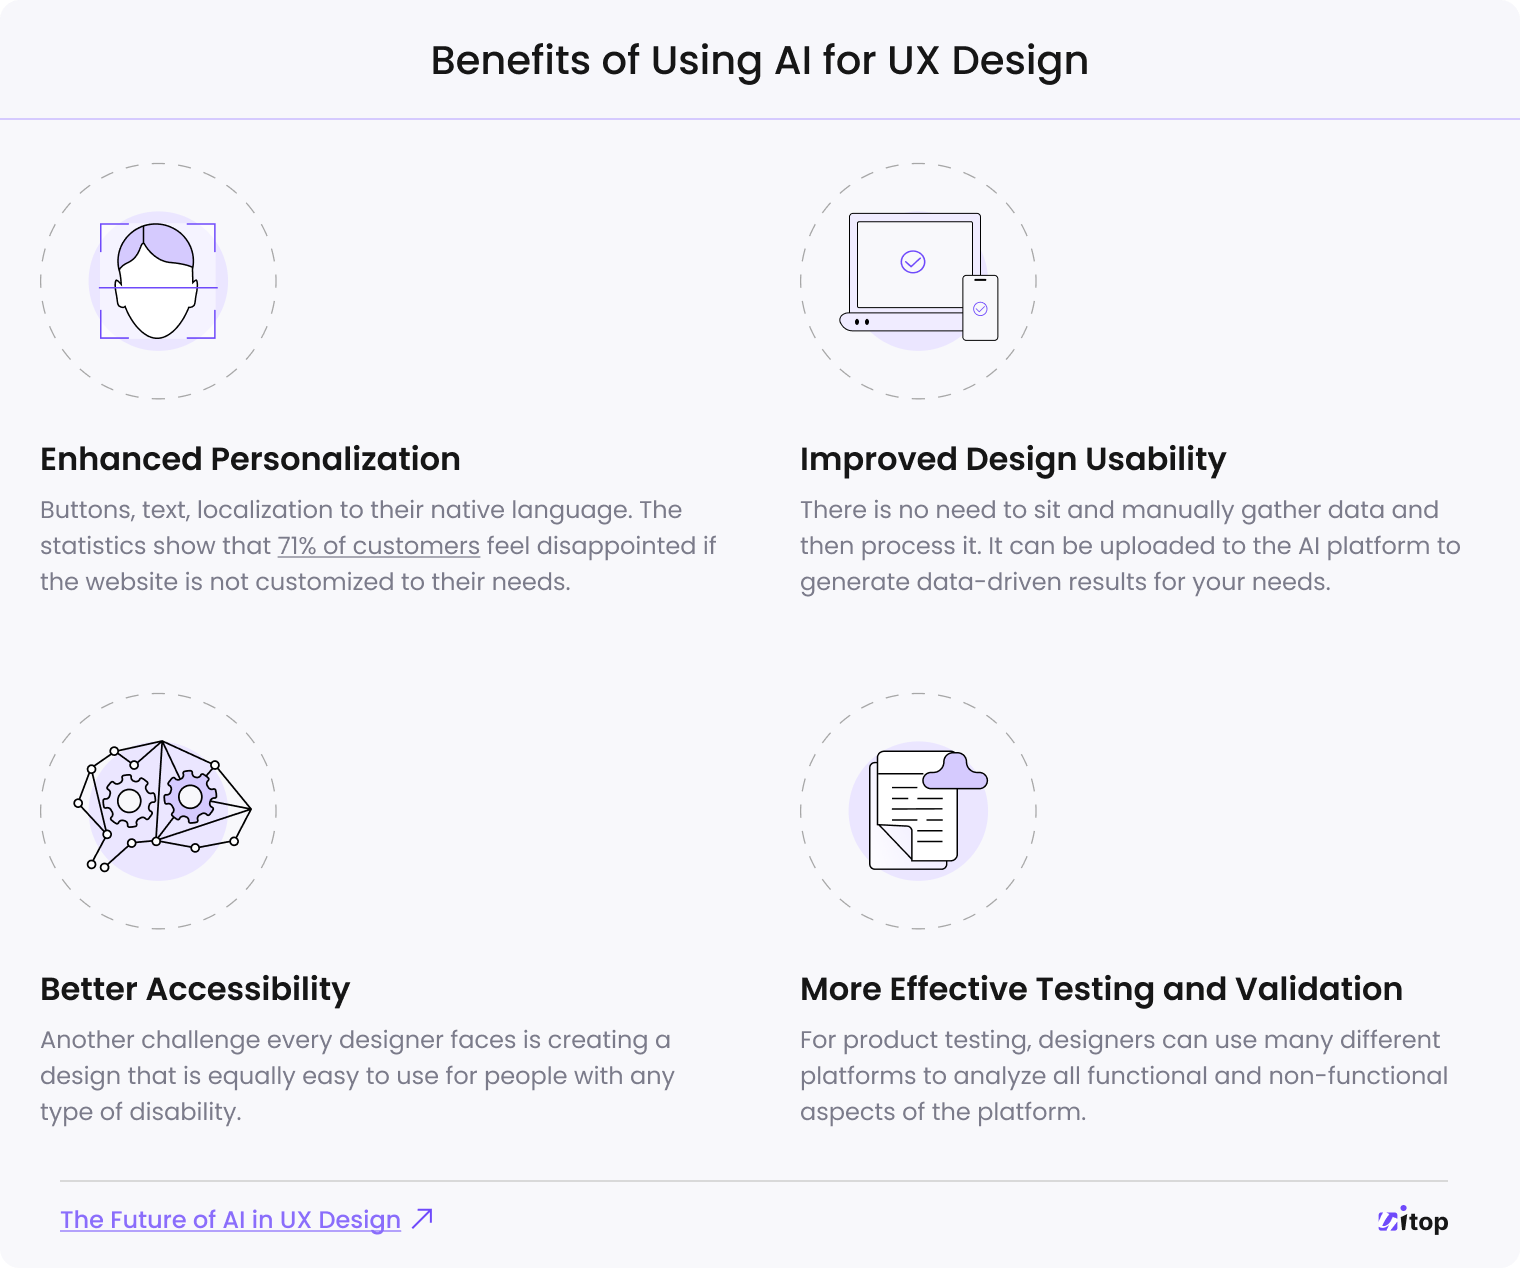 Benefits of Using AI for UX Design